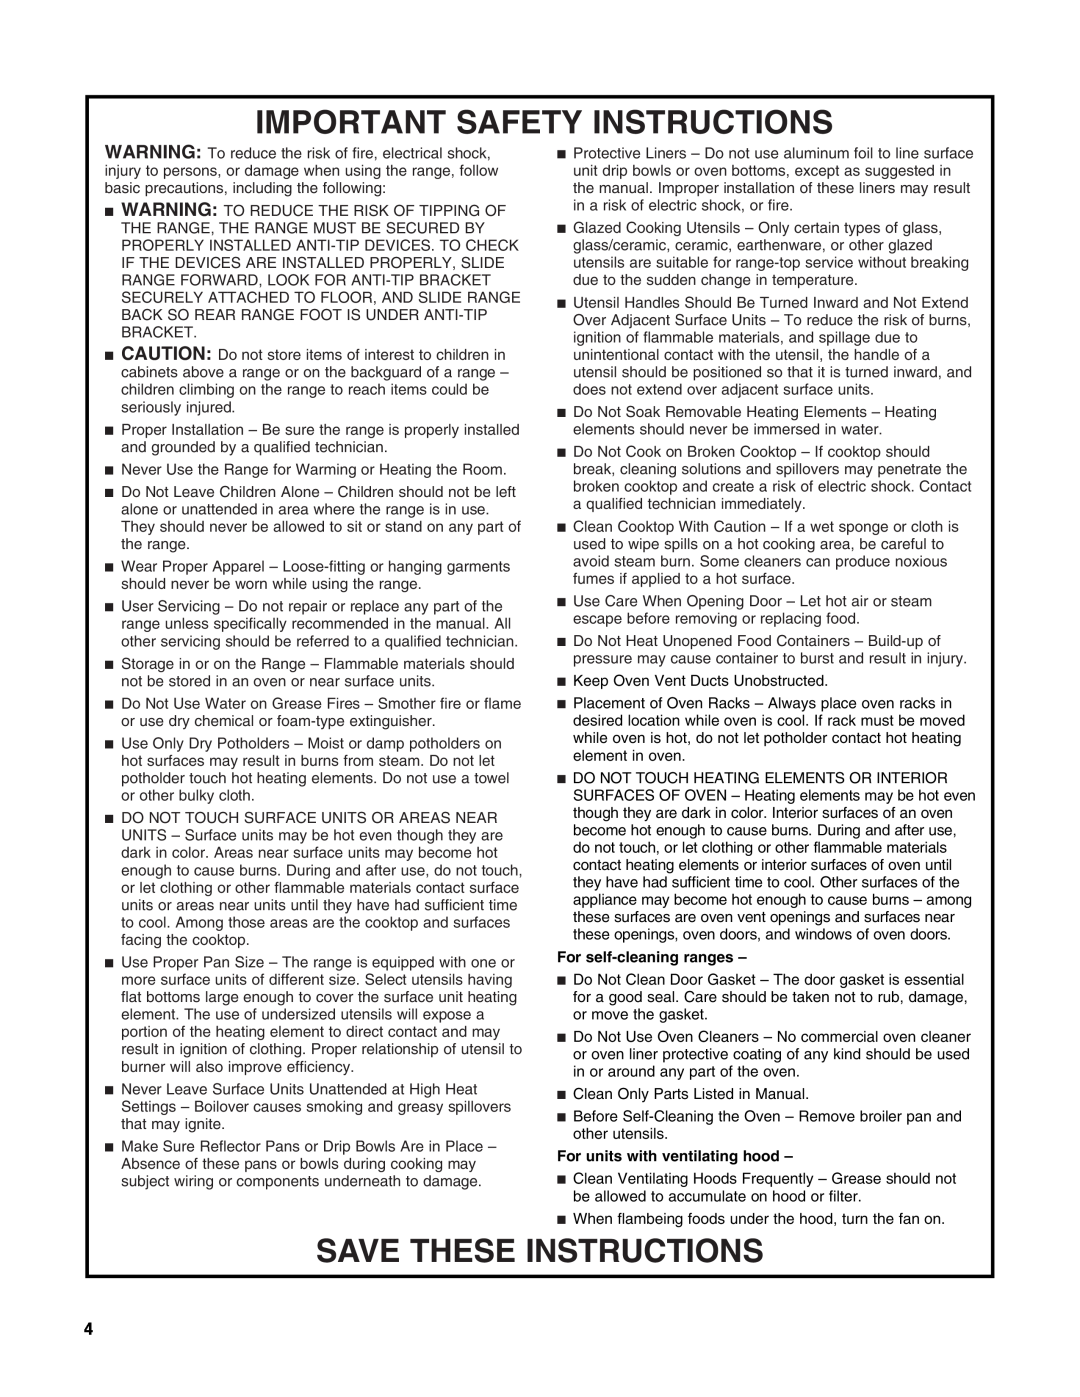 Whirlpool W10162215A manual Important Safety Instructions, Save These Instructions, For self-cleaning ranges 